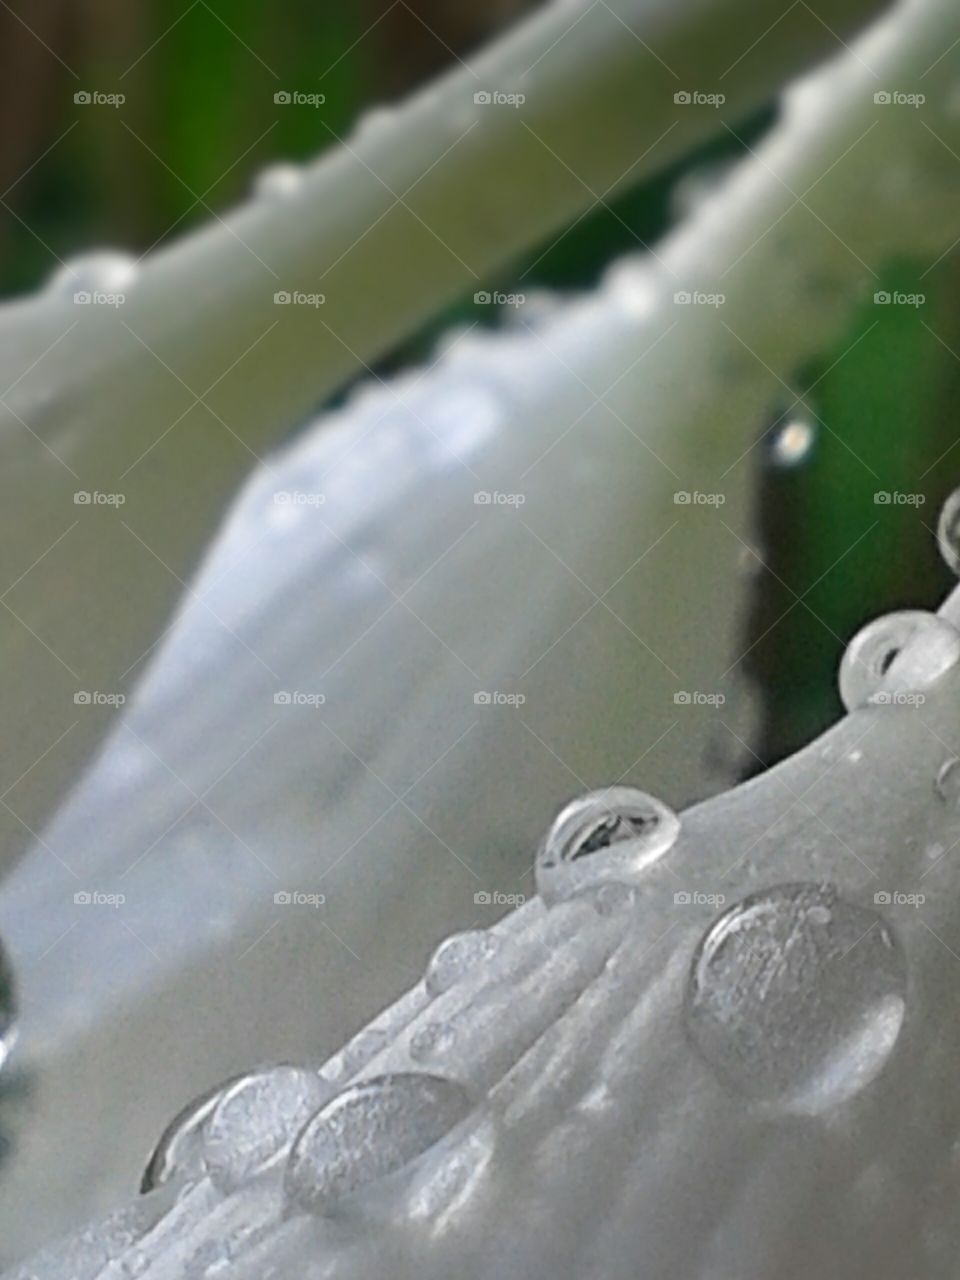 Resting droplets. The morning air allows for extra dew to collect and hydrate the blossoms.